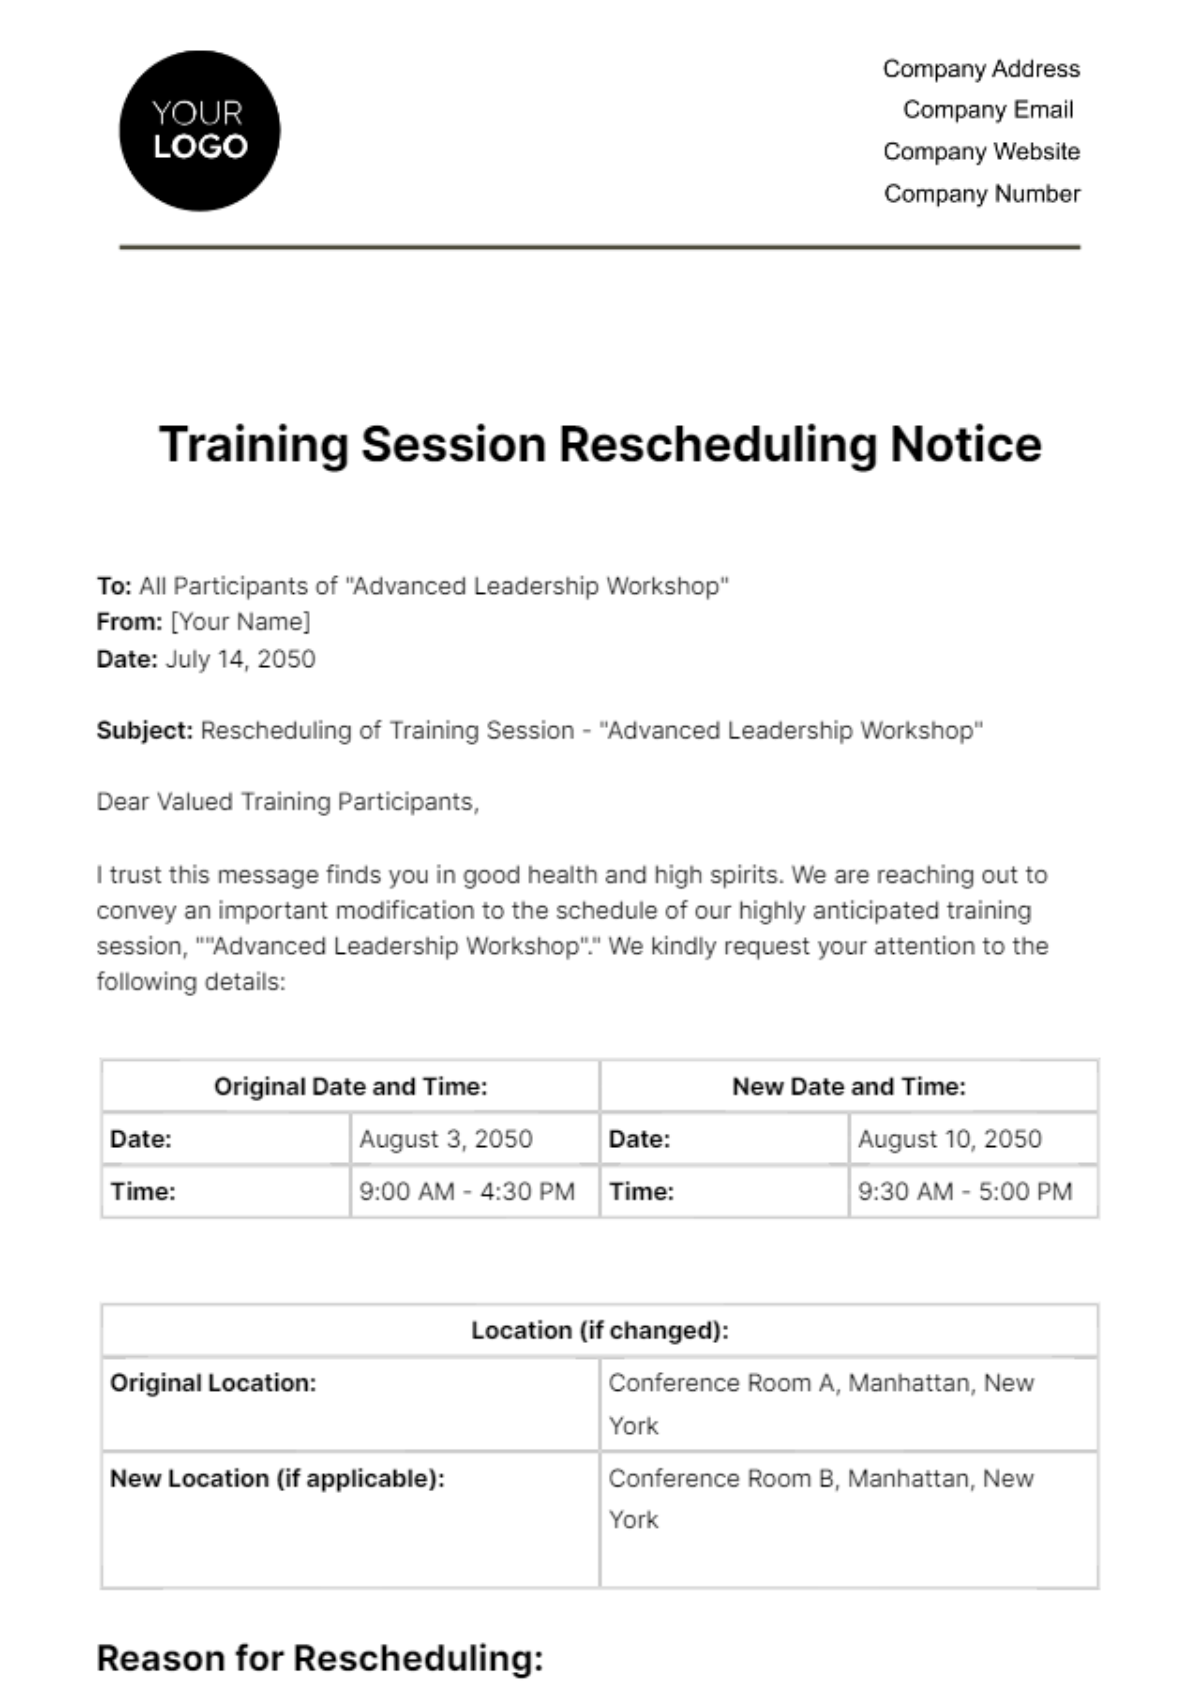 Training Session Rescheduling Notice HR Template